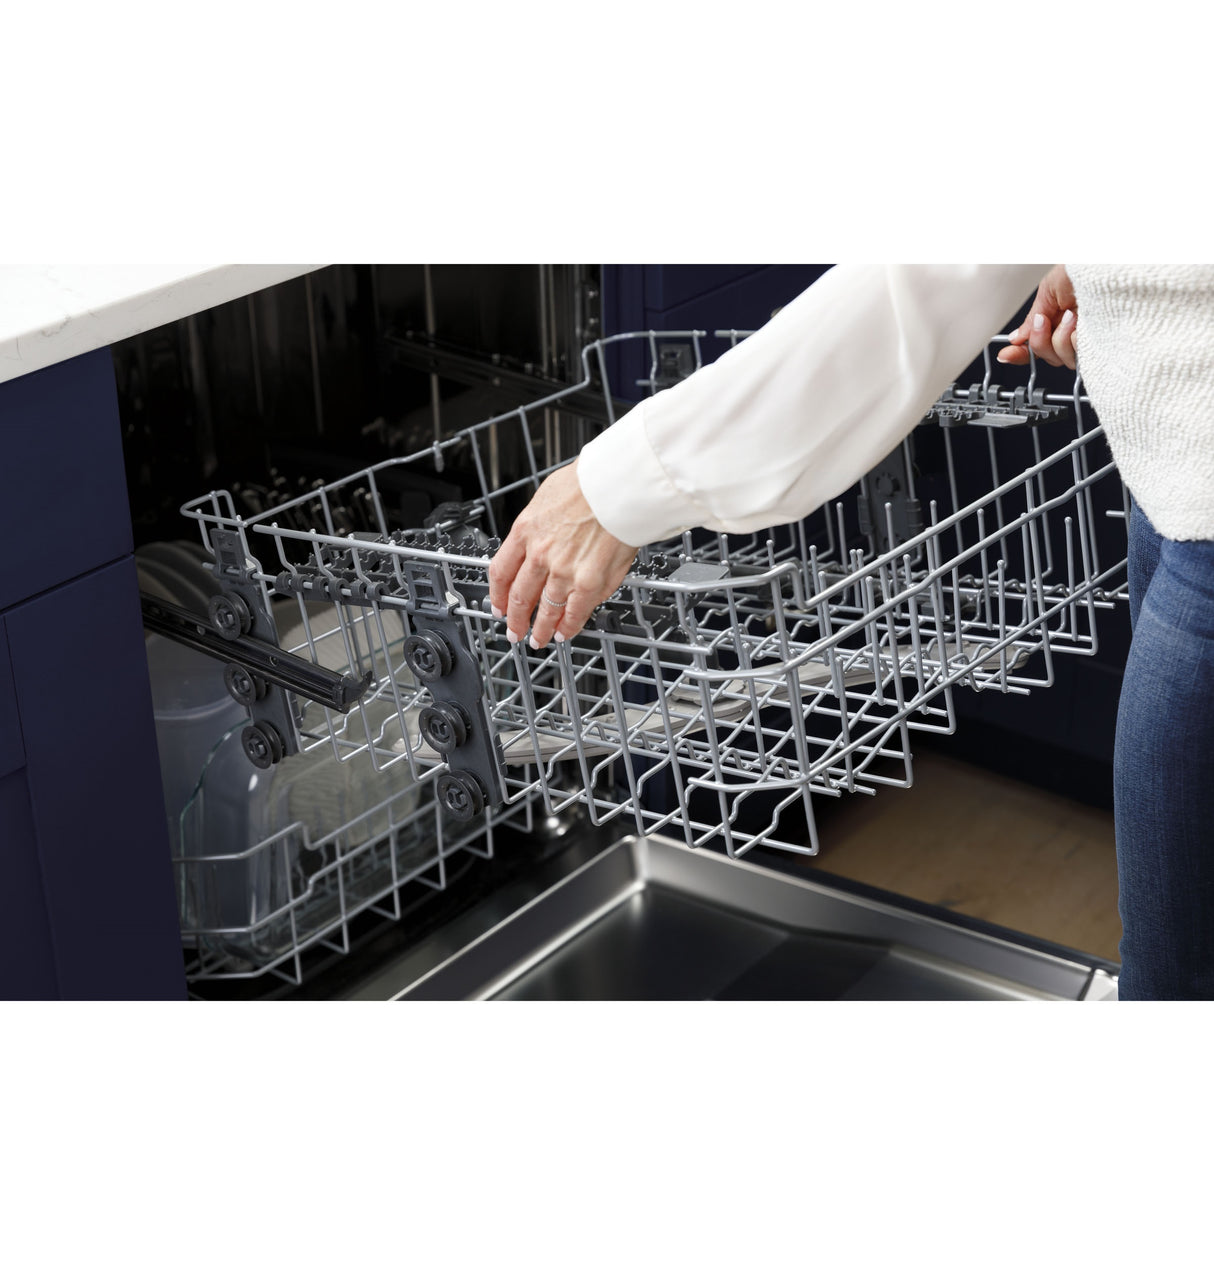 GE(R) ENERGY STAR(R) Fingerprint Resistant Top Control with Stainless Steel Interior Dishwasher with Sanitize Cycle & Dry Boost with Fan Assist - (GDT645SYNFS)